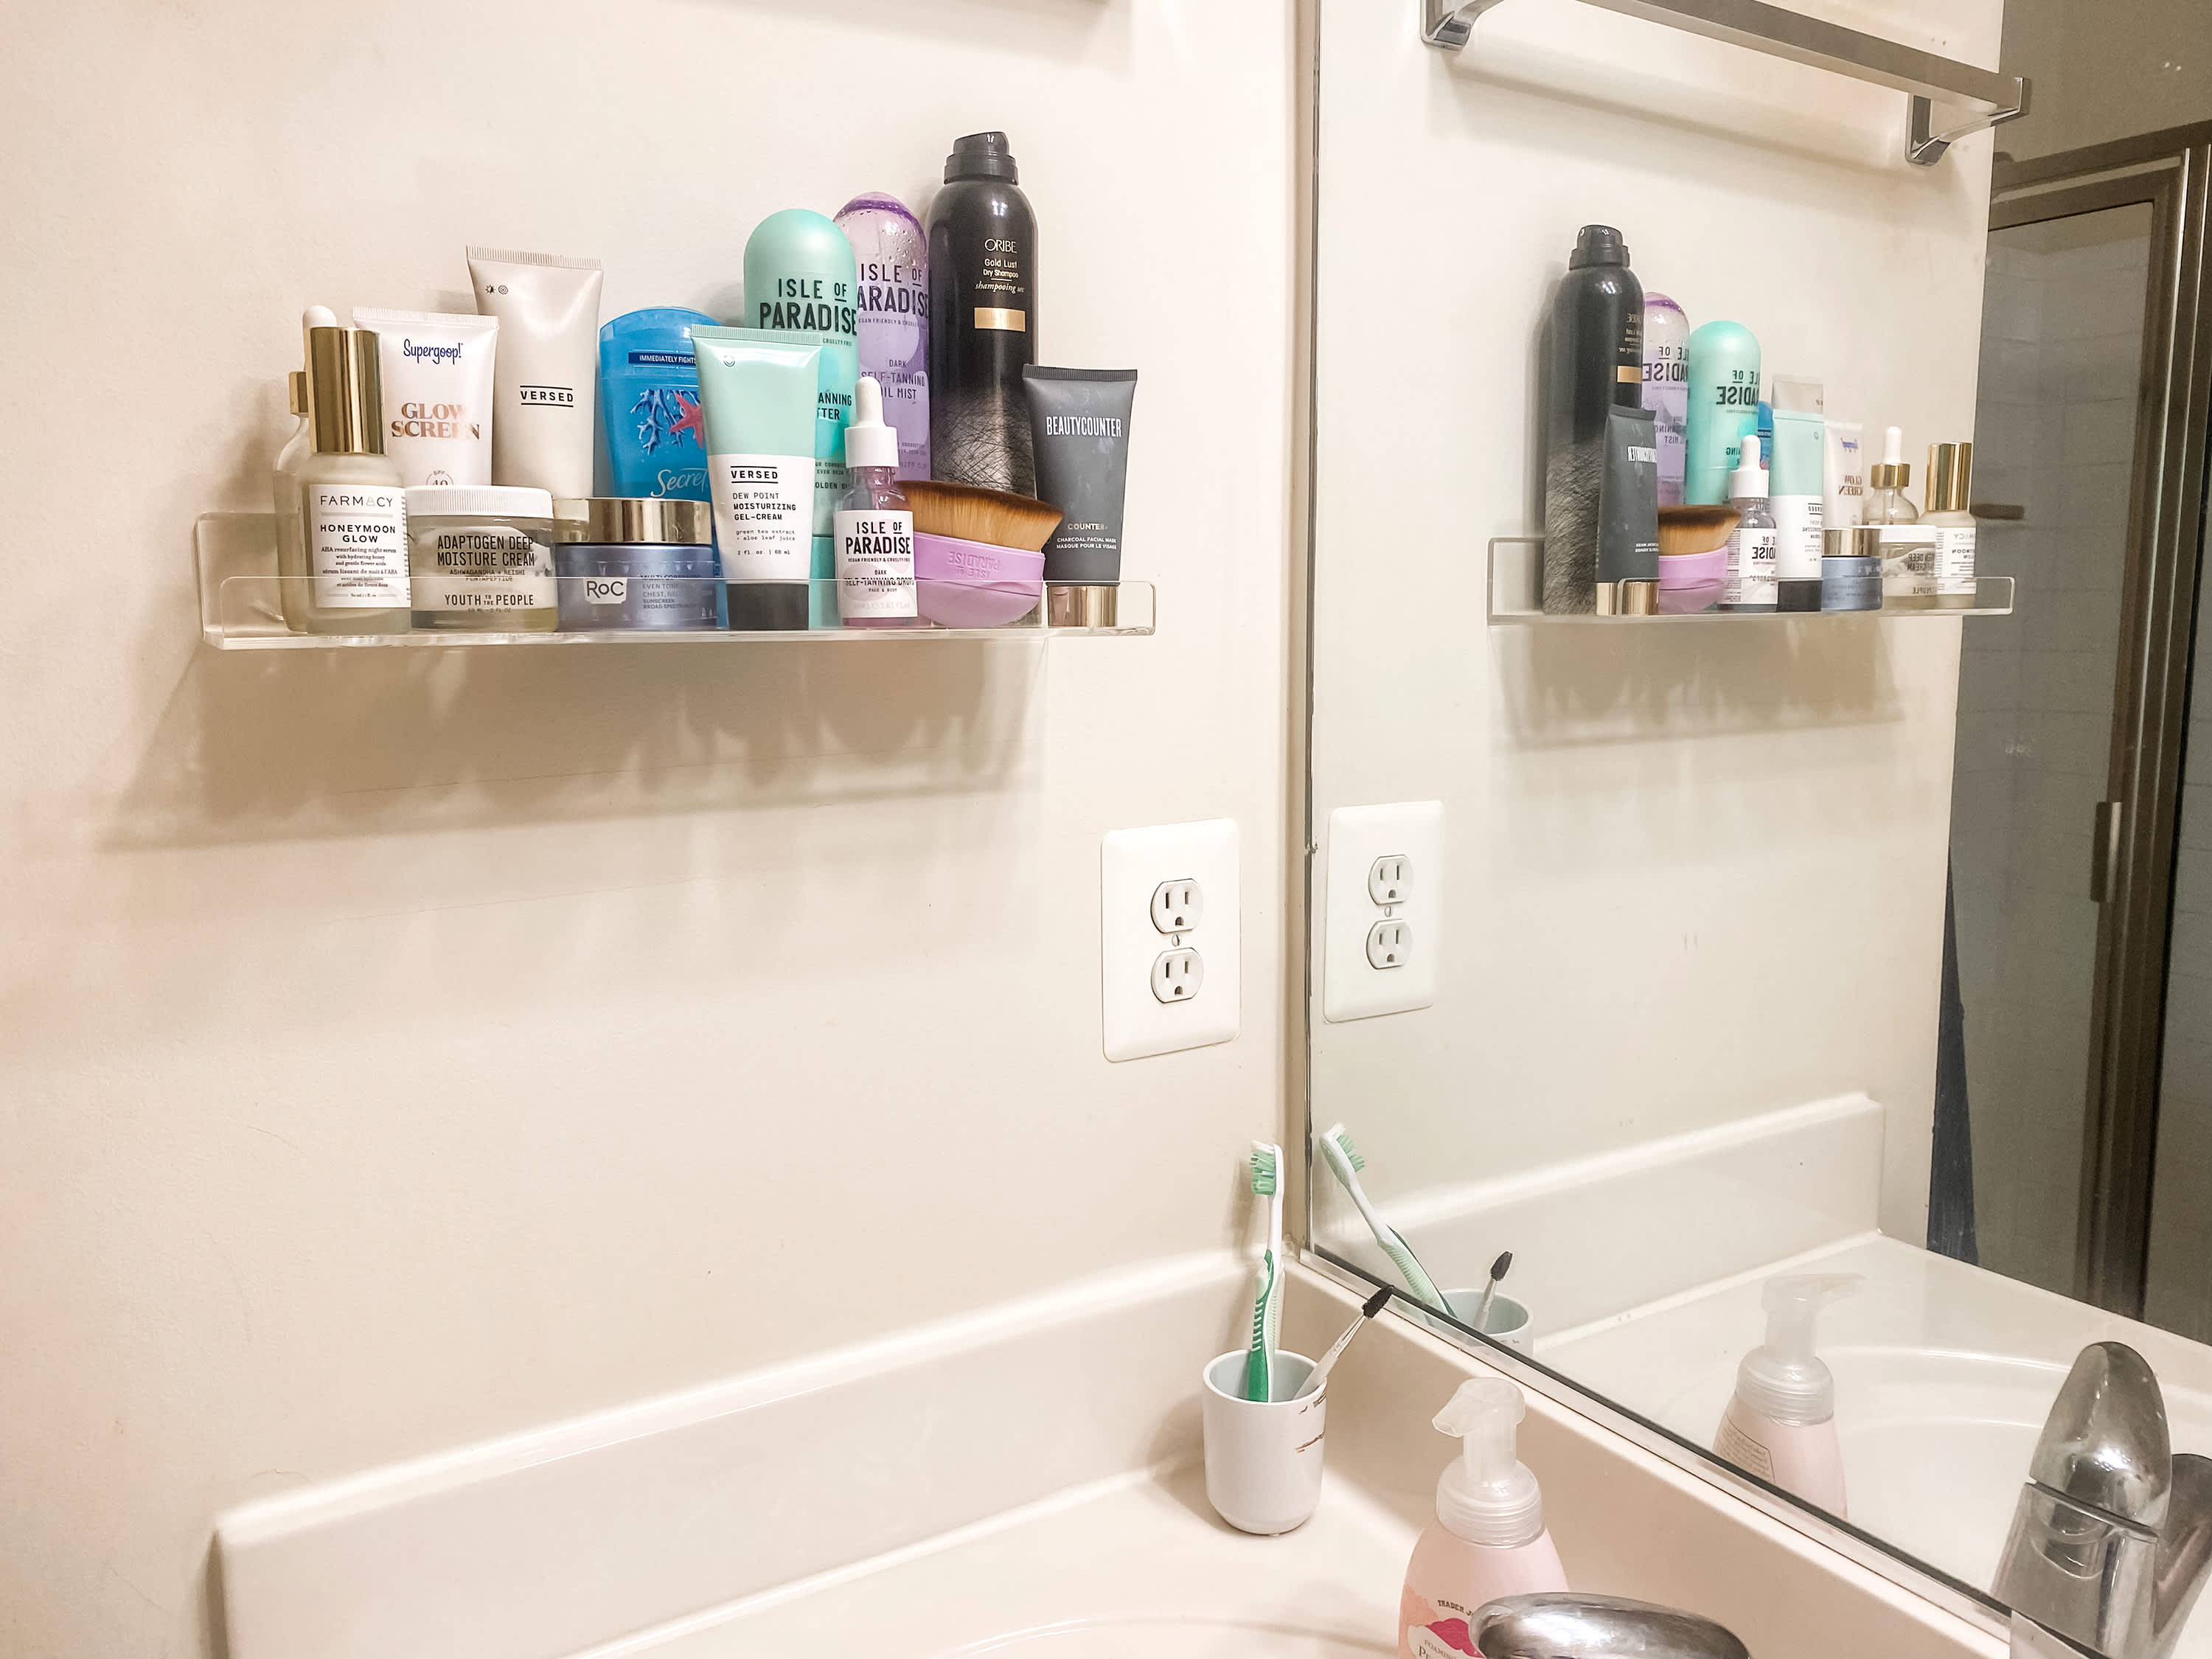 Weiai Clear Acrylic Shelf Review — Great for Small Bathrooms